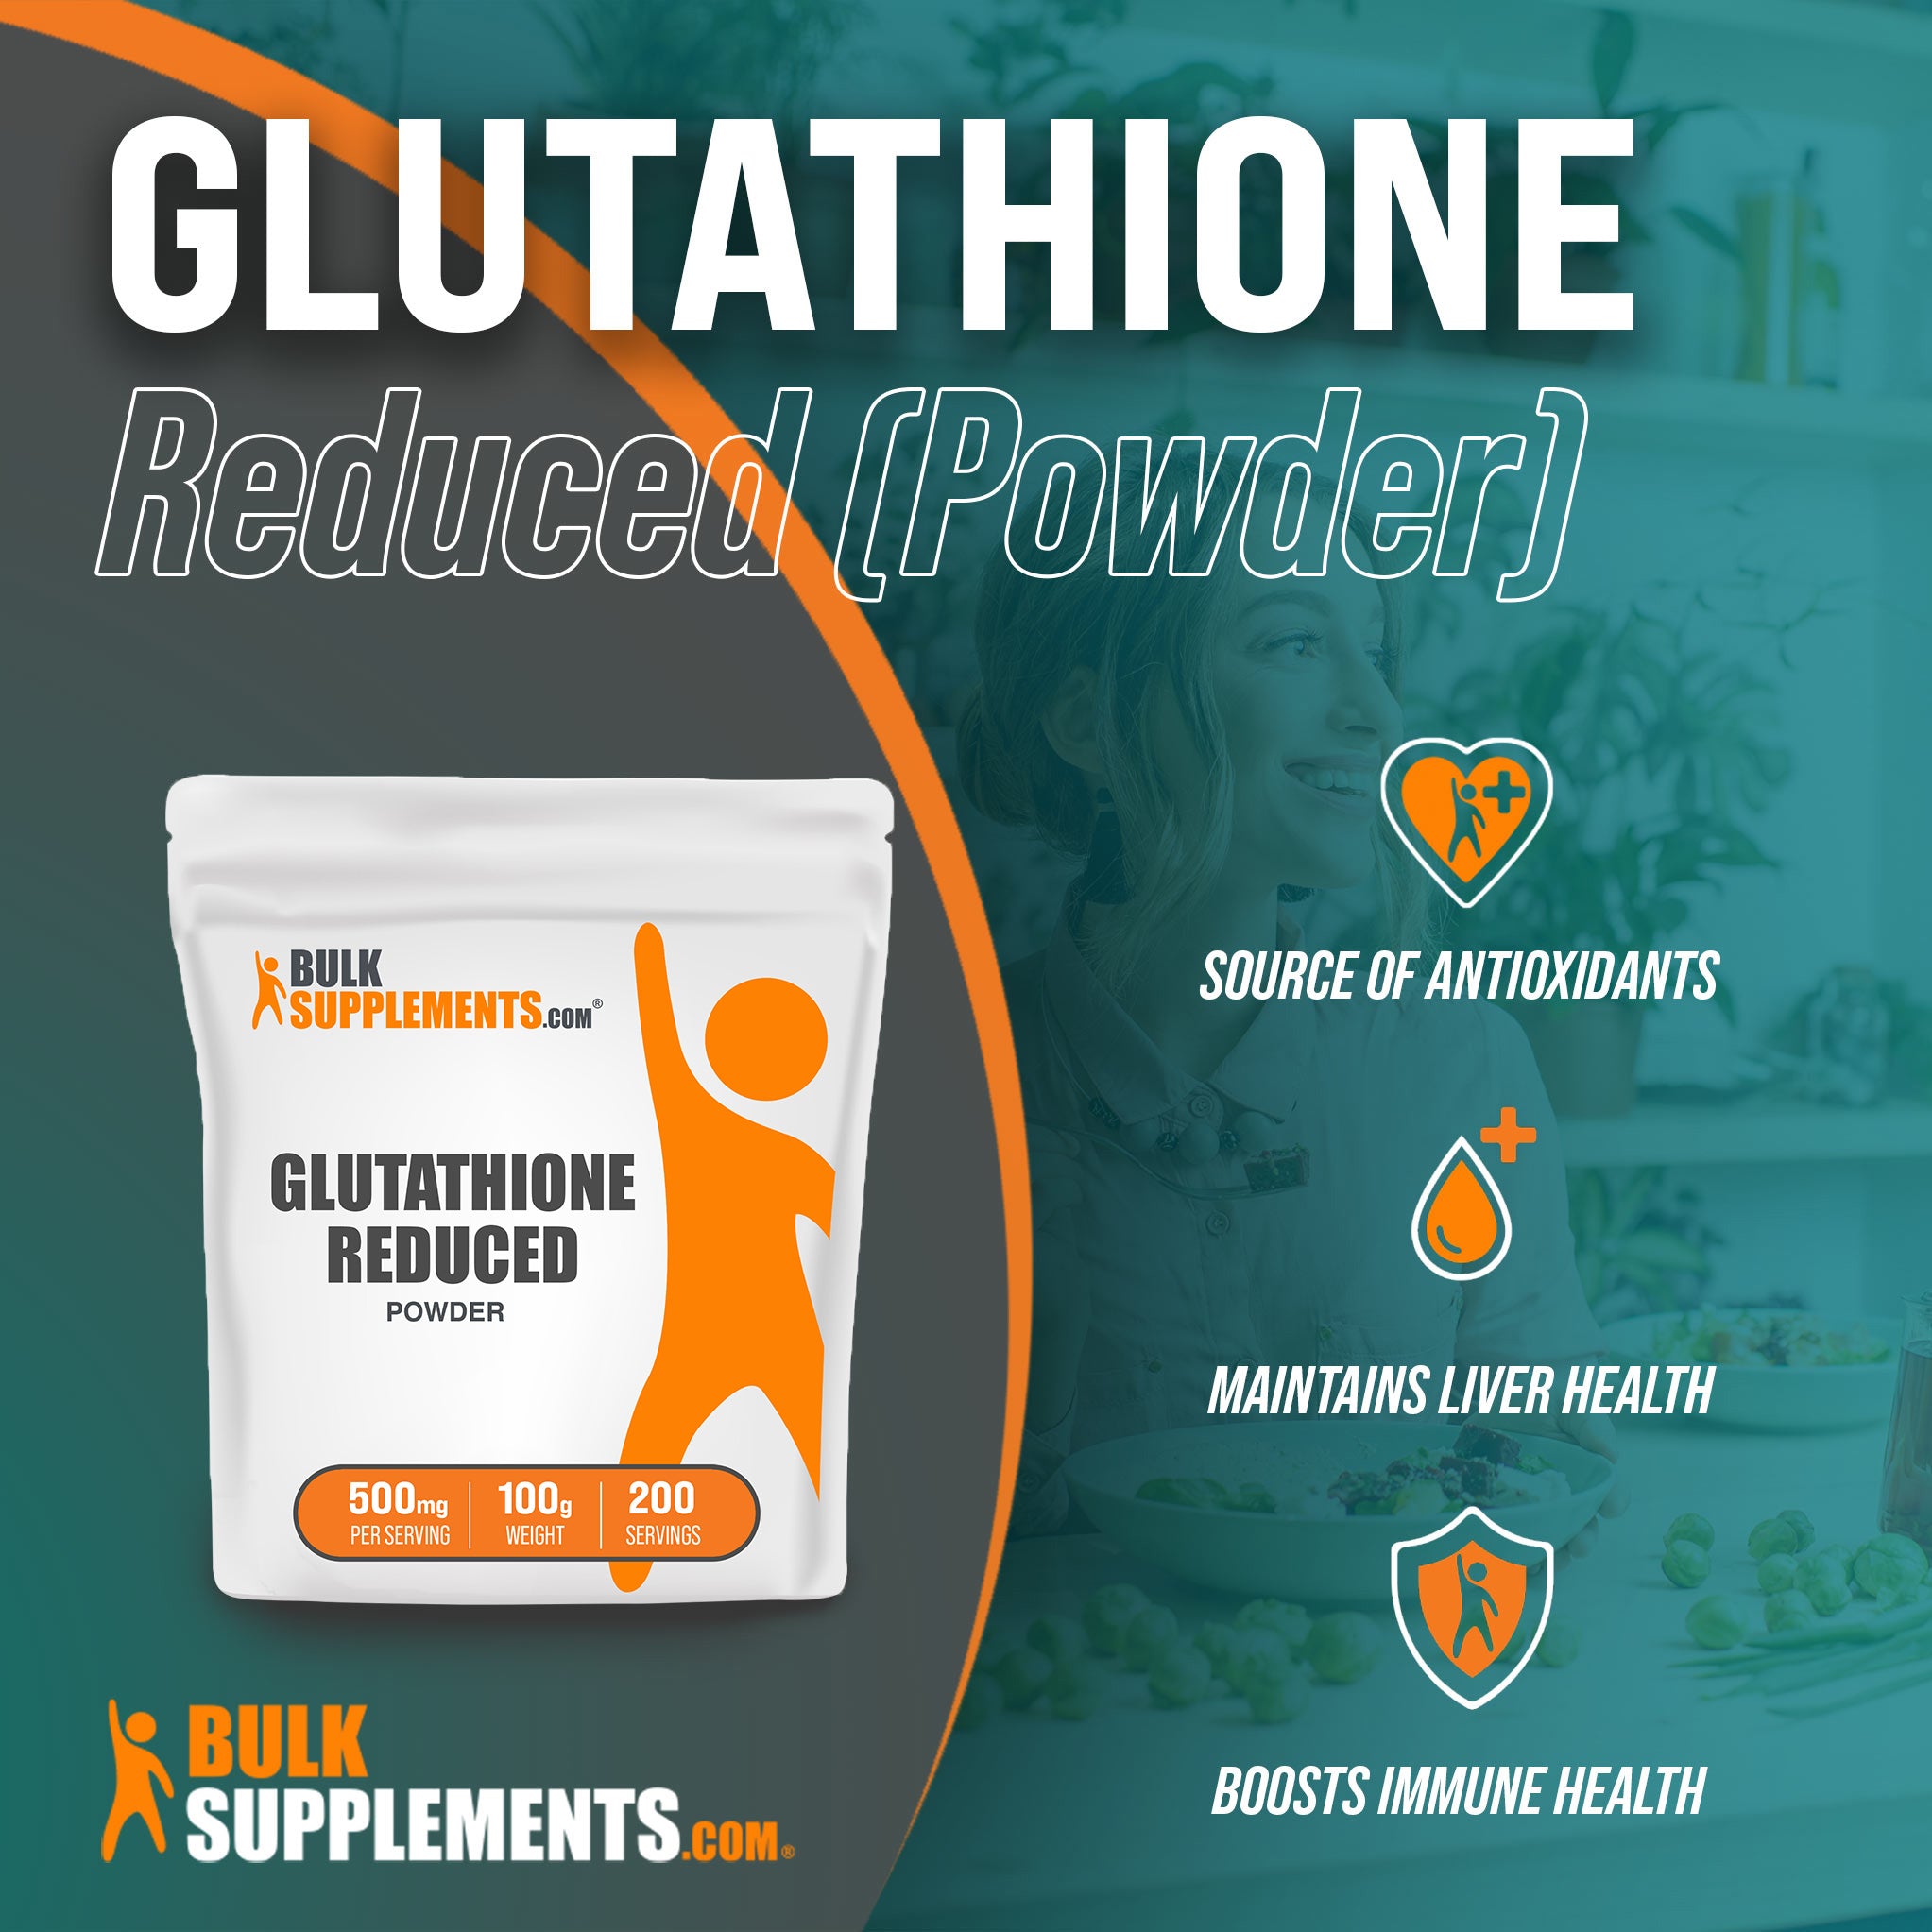 Benefits of Glutathione Reduced: source of antioxidants, maintains liver health, boosts immune health